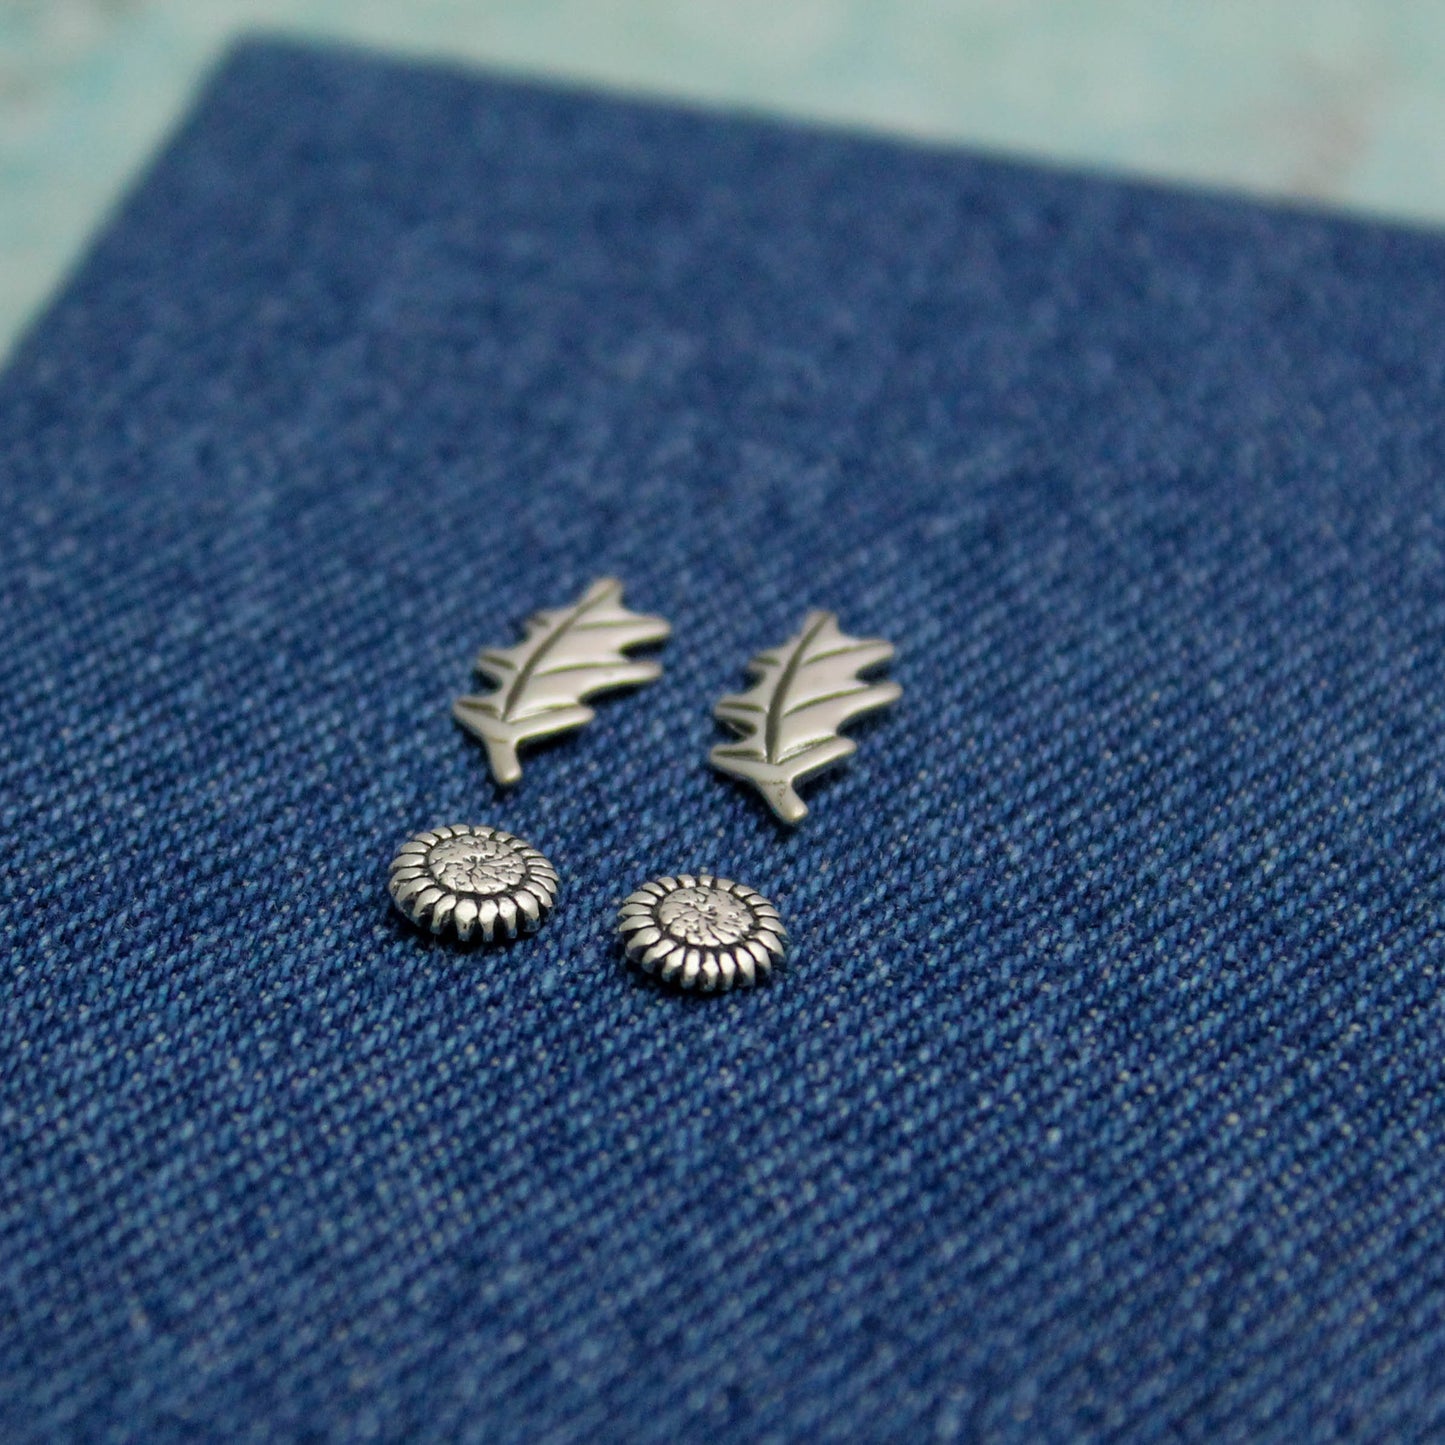 Cute Studs in Sterling Silver Sunflowers and Fall Leaves, Minimalist Silver Stud Earrings, Cute Gift for Her, Fall Style Stud Earrings